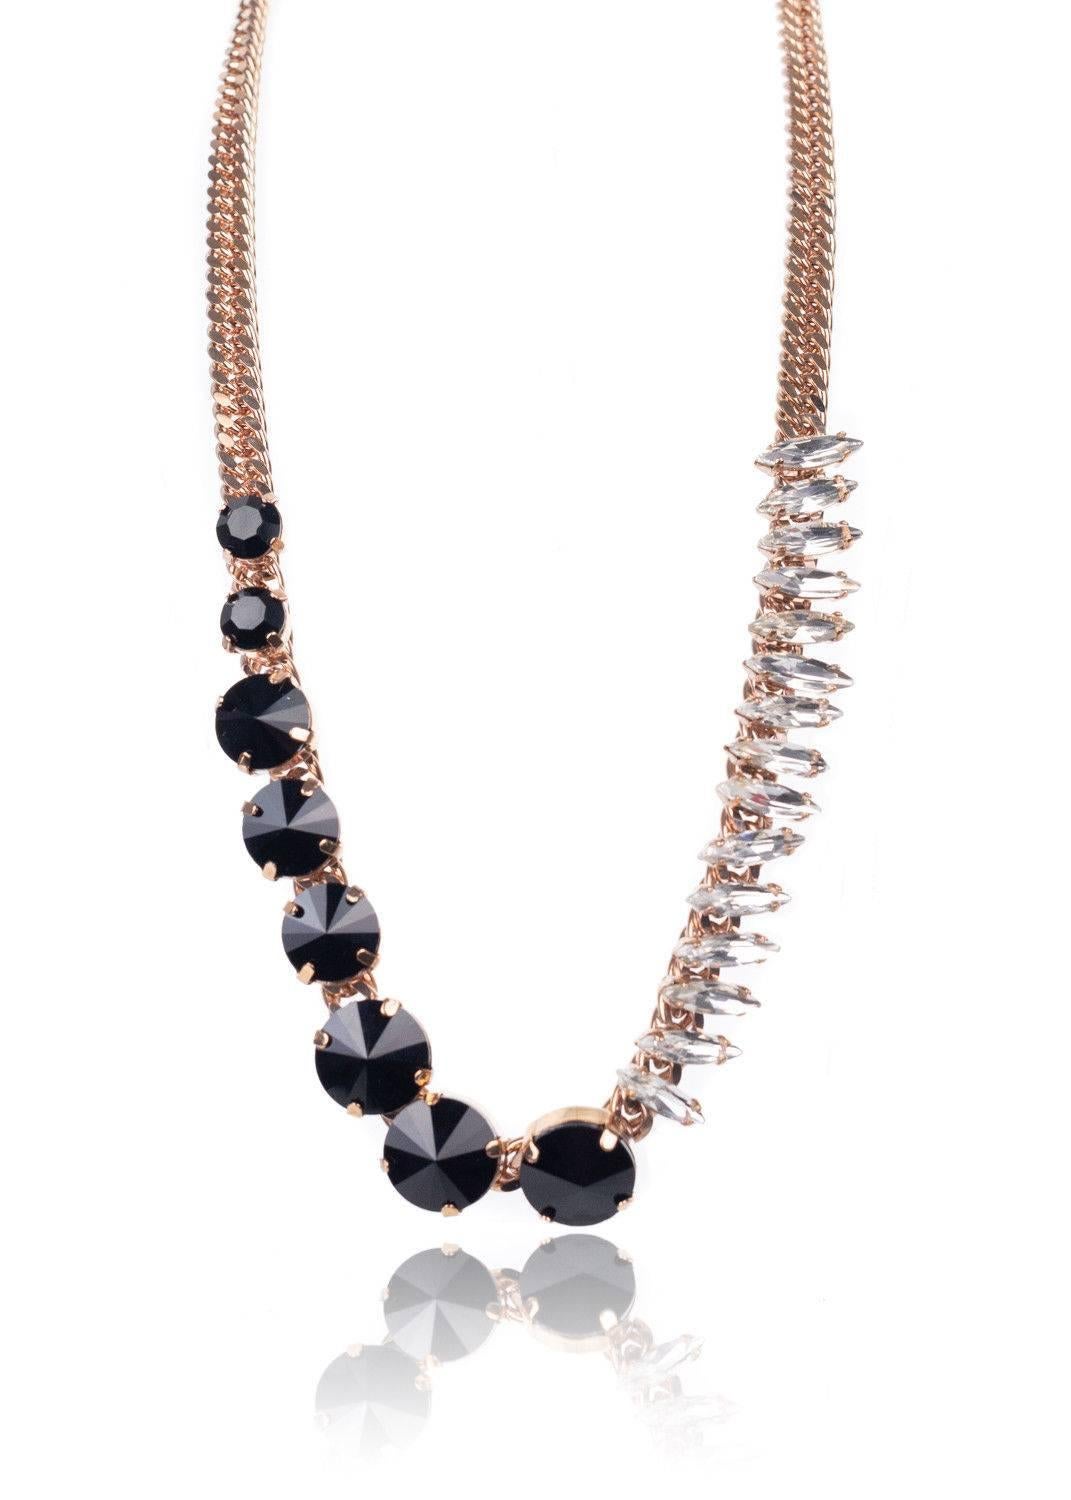 Get your Roberto Cavalli Necklace for an elegant finish. This necklace features a roped gold chain, chiseled black and coned stones, and lobster clasp closure. You can pair this necklace with a deep v neck dress and go.

9.5 inch Length
Chiseled